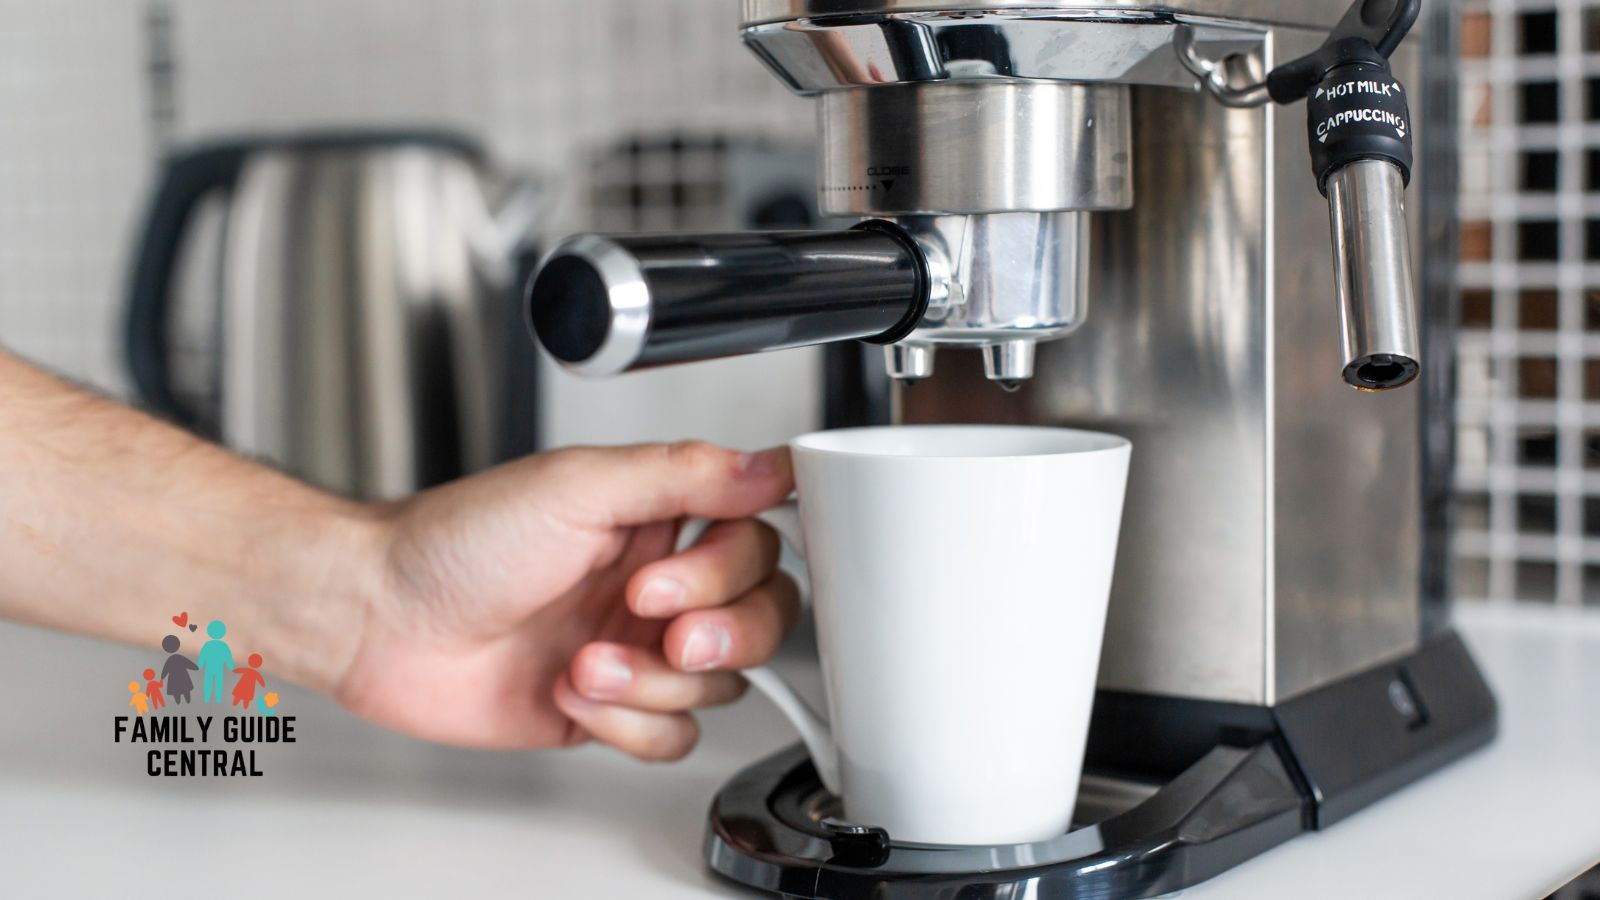 Coffee maker not Brewing - familyguidecentral.com